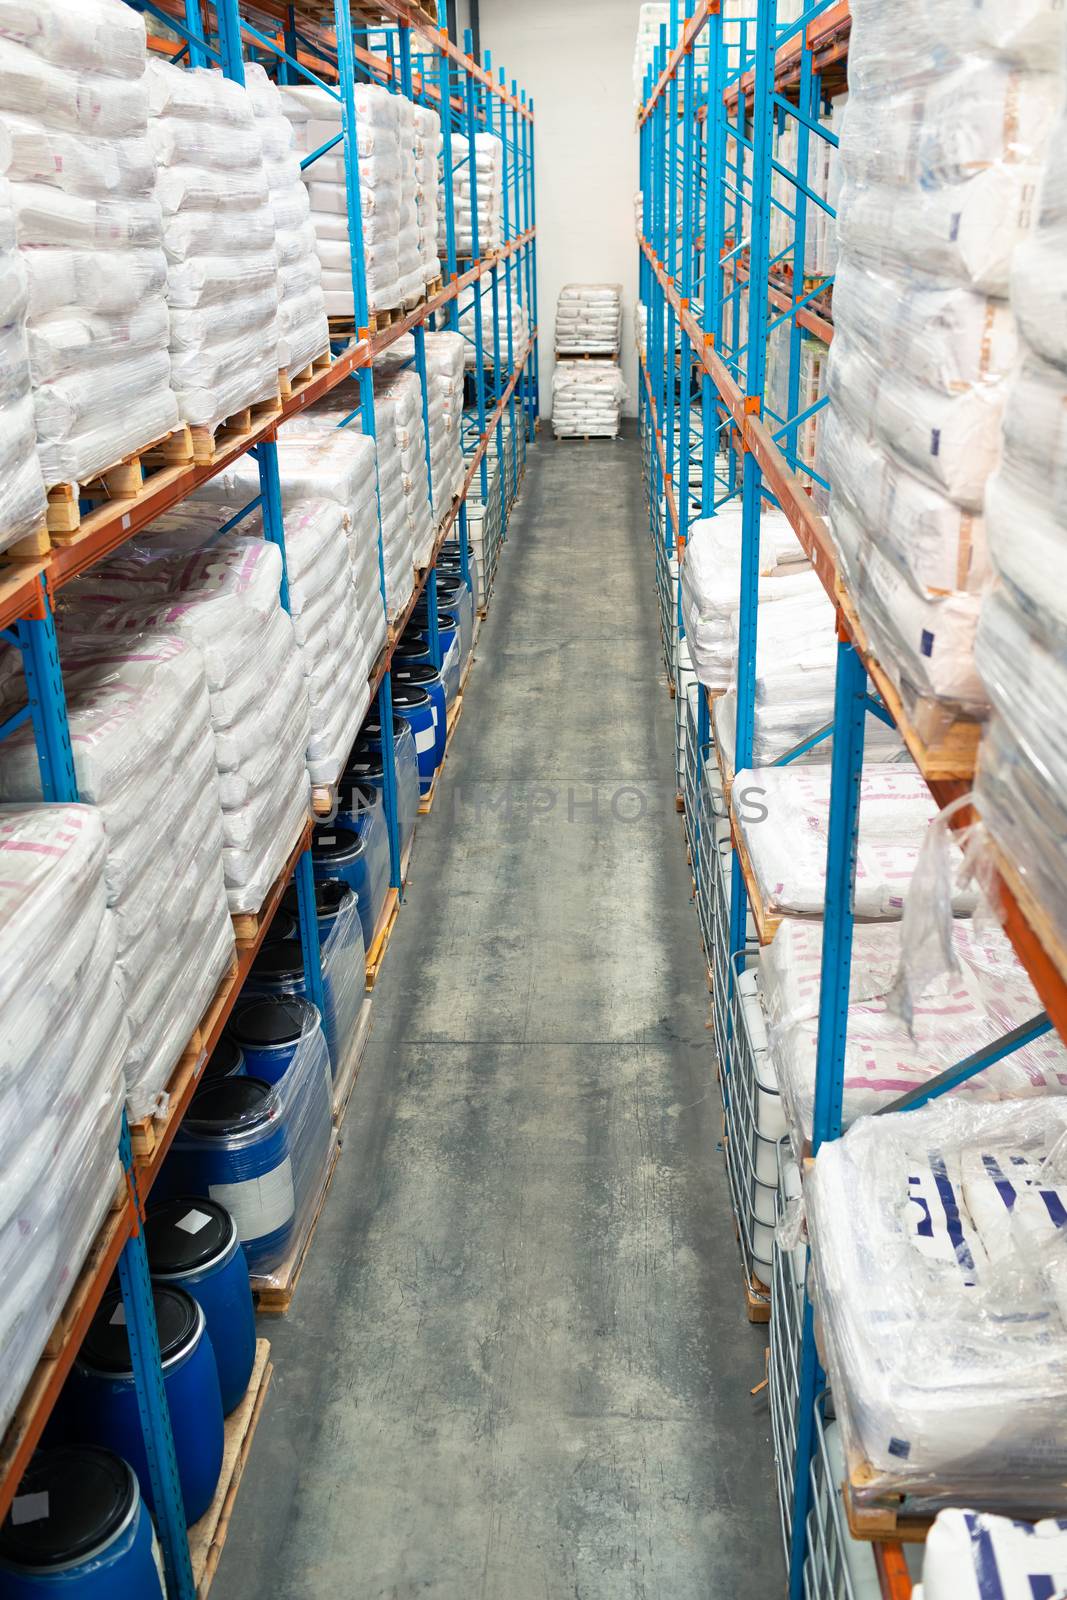 High angle view of barrel and goods arranged on a rack in warehouse. This is a freight transportation and distribution warehouse. Industrial and industrial workers concept